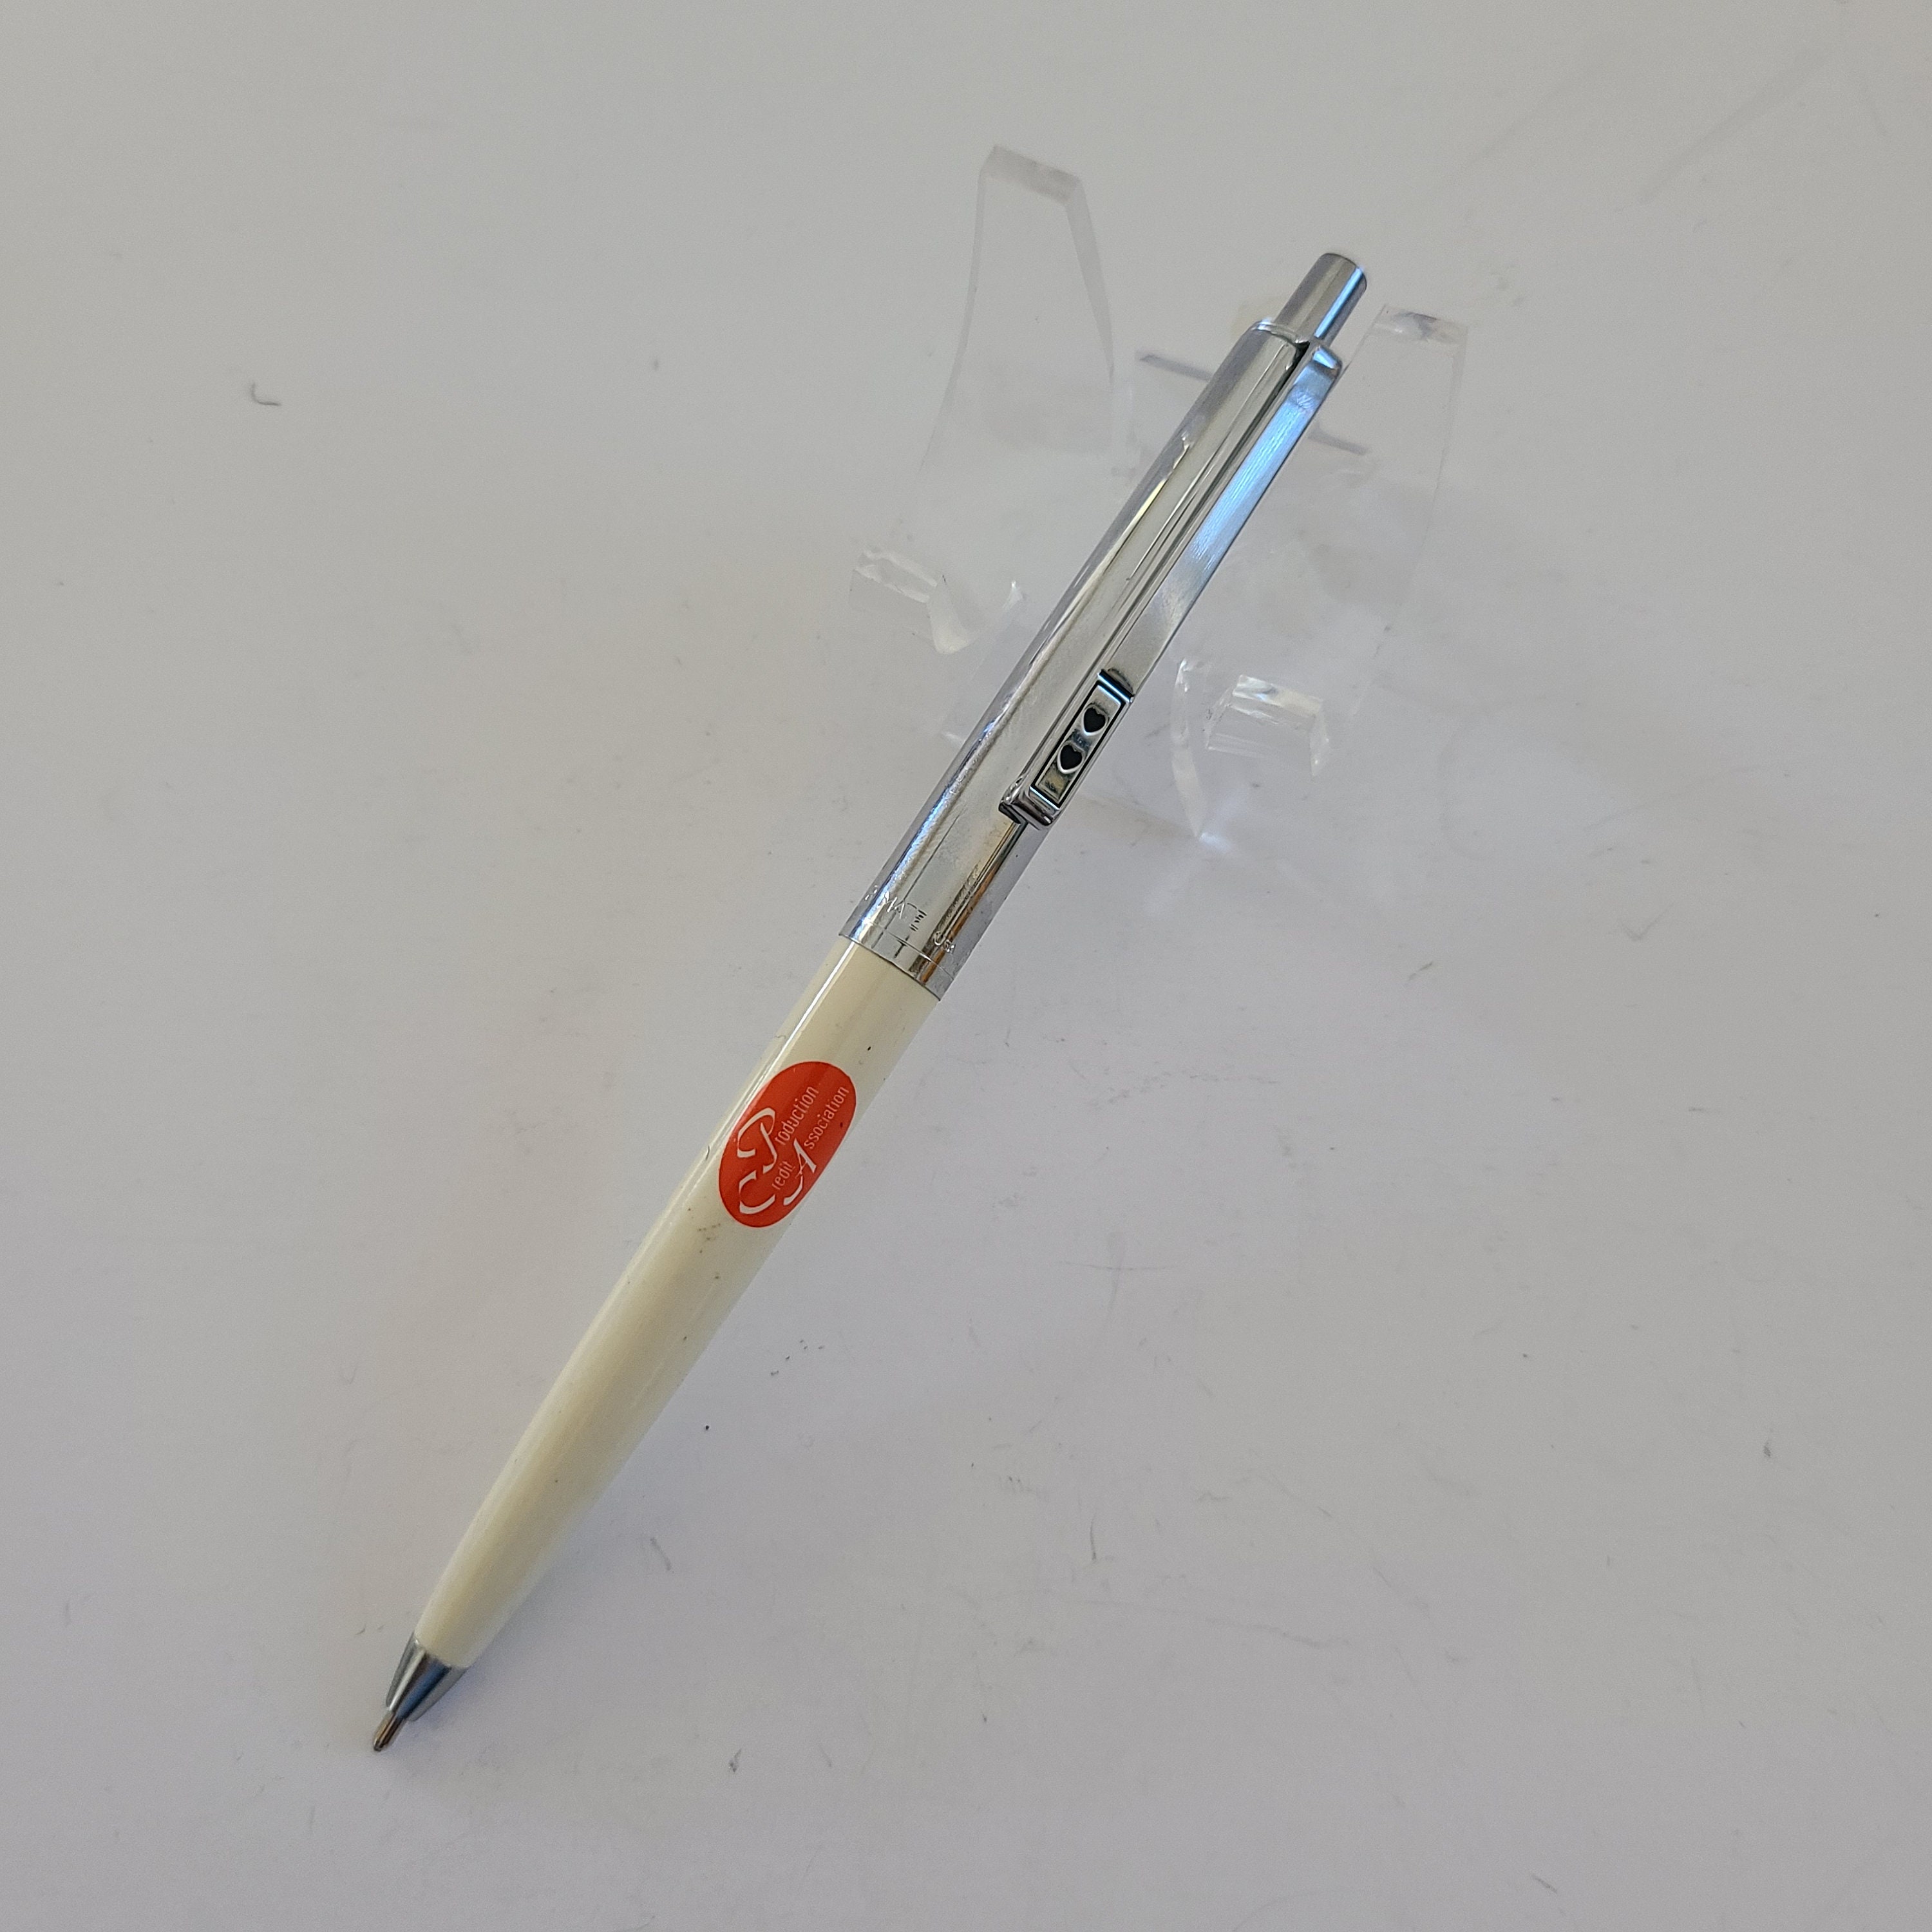 Vintage Circa 1960's Scripto Grease Pencil Commonly Known as a China Marker  Used in Groceries, Good Condition 